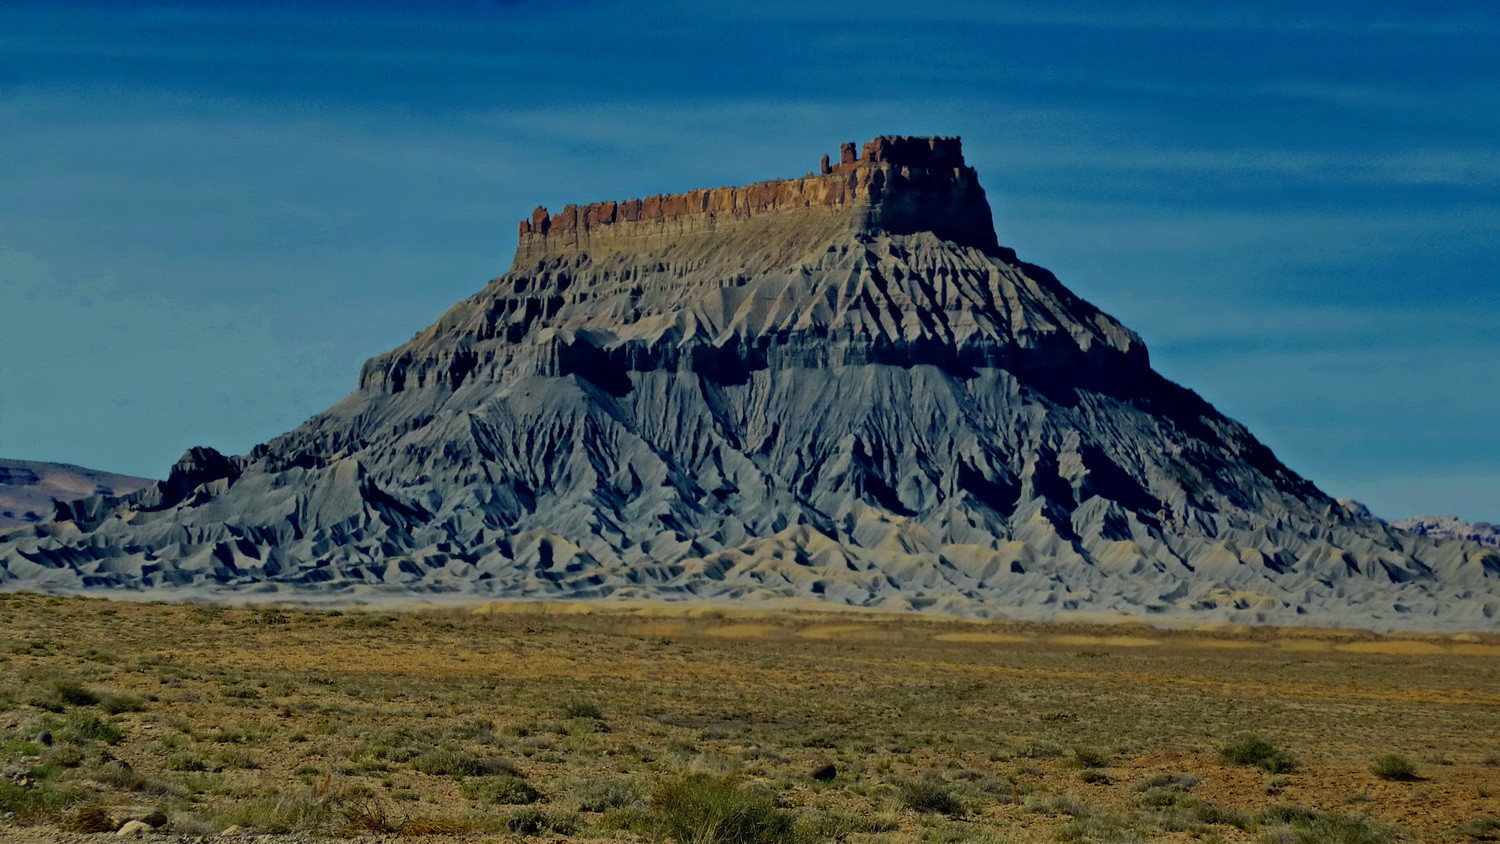 Factory Butte seen from the street Ut24 closen to the eastern entrance of the Capitol Reef National Park